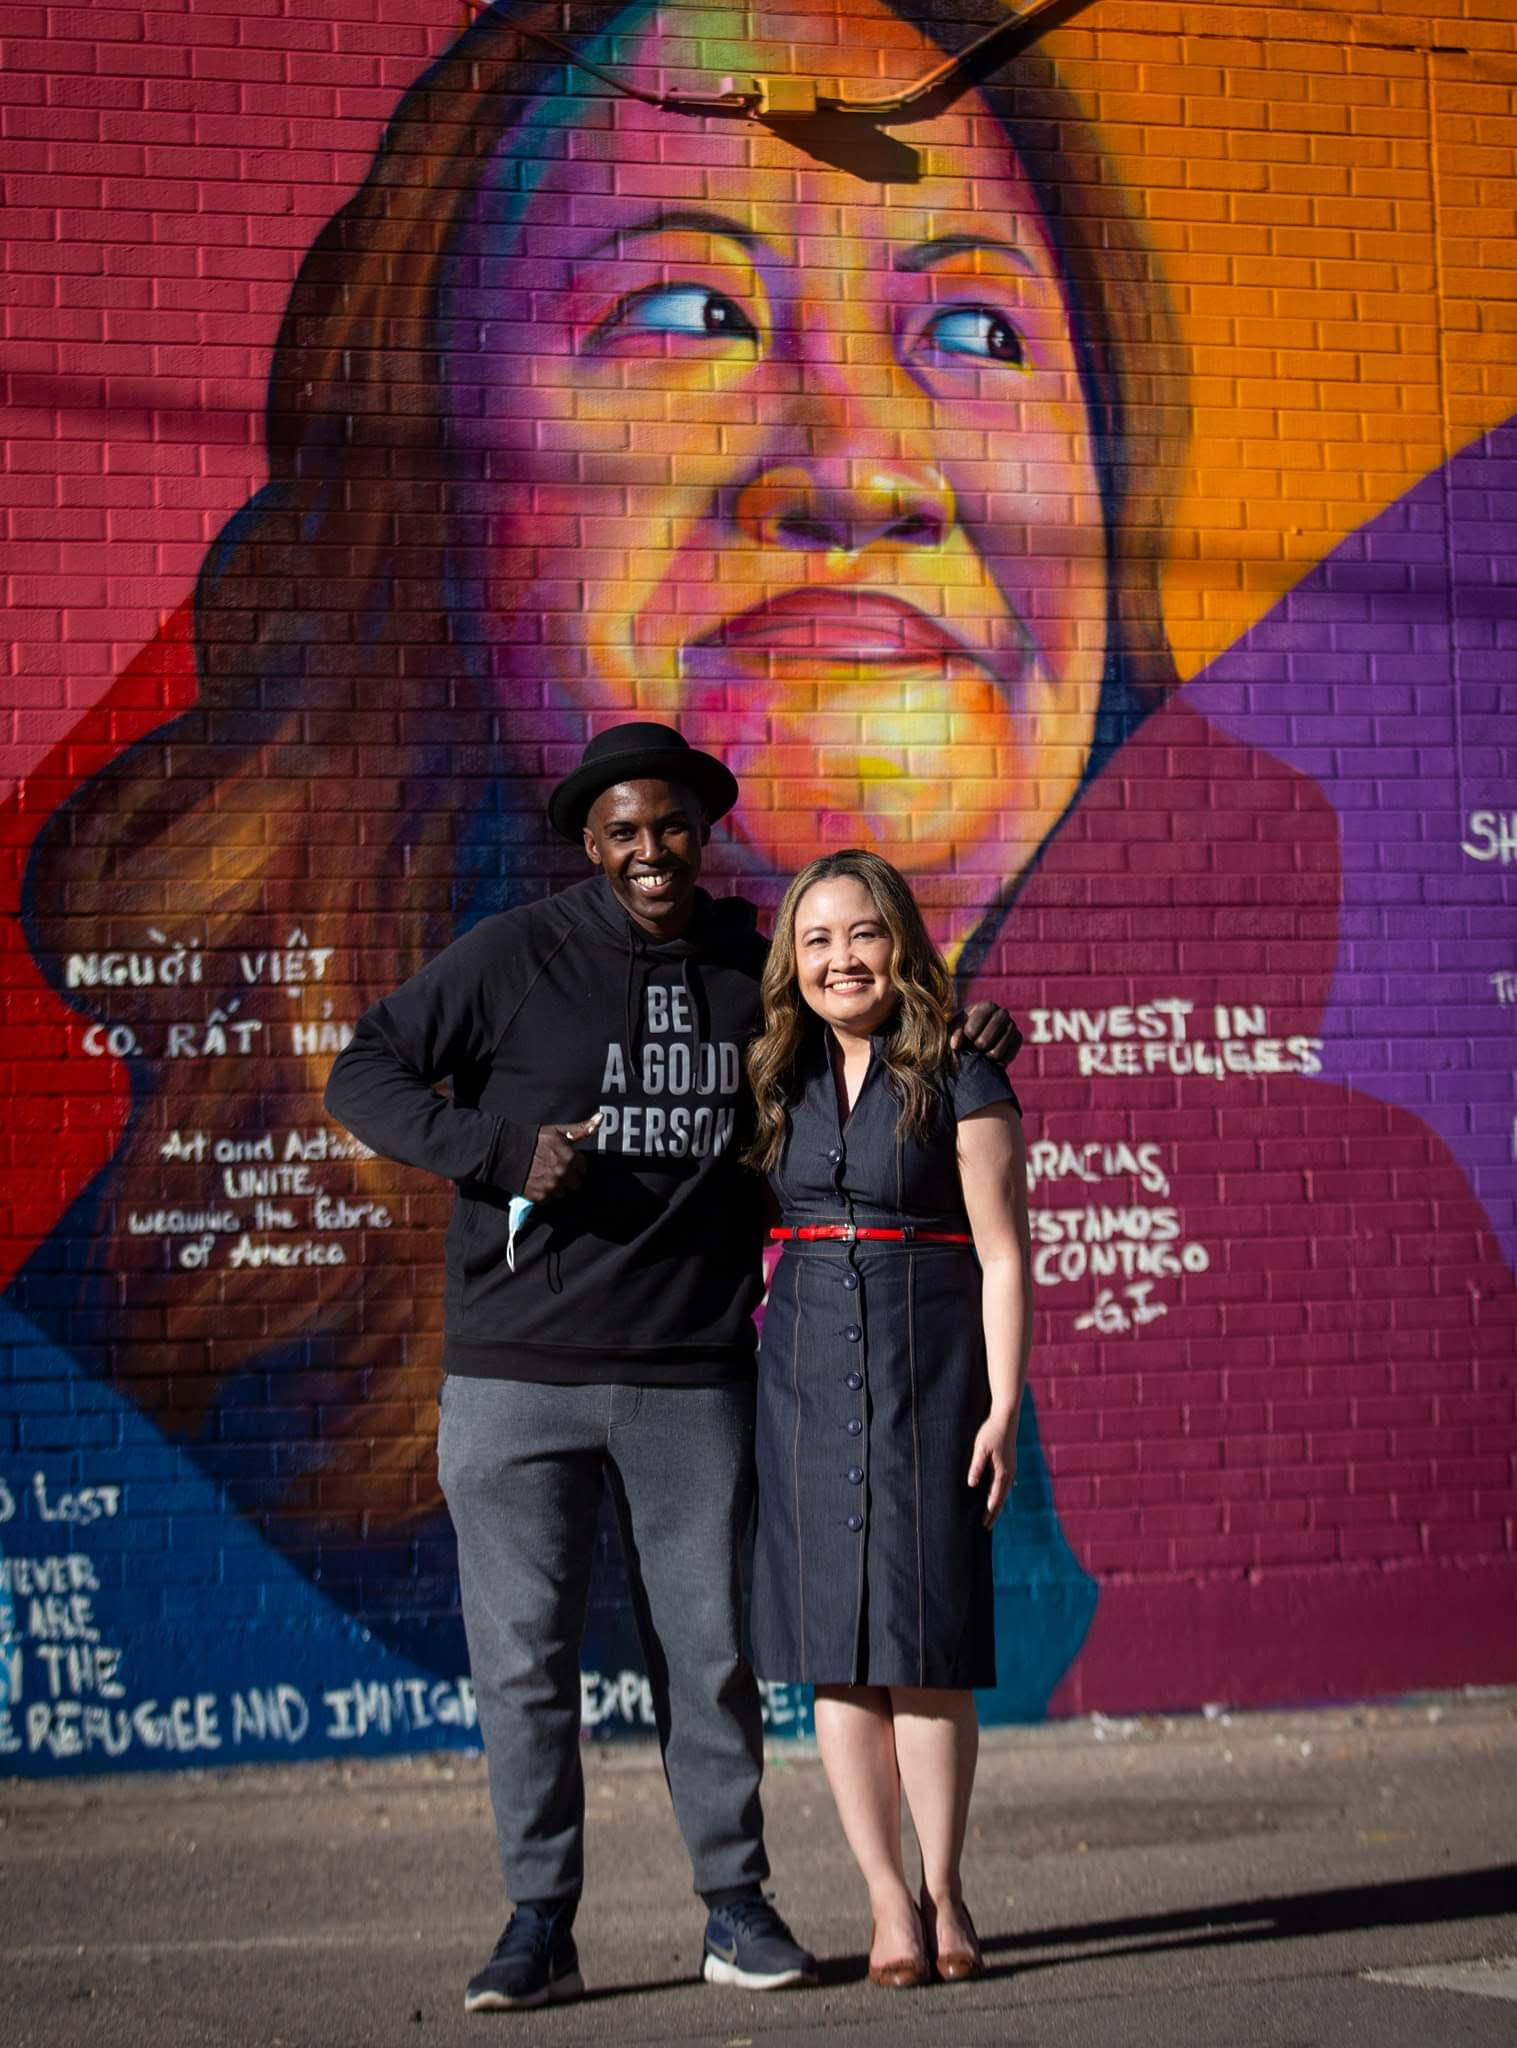 Photo of Nga Vương-Sandoval with Artist/Muralist Thomas Evans (I Am Detour). They are standing with arms around each other in front of the mural Evans created to recognize Vuong-Sandoval's advocacy work. The mural is an exterior brick wall, and the close up image of her face has been created using bright colors of red, orange, and pink.